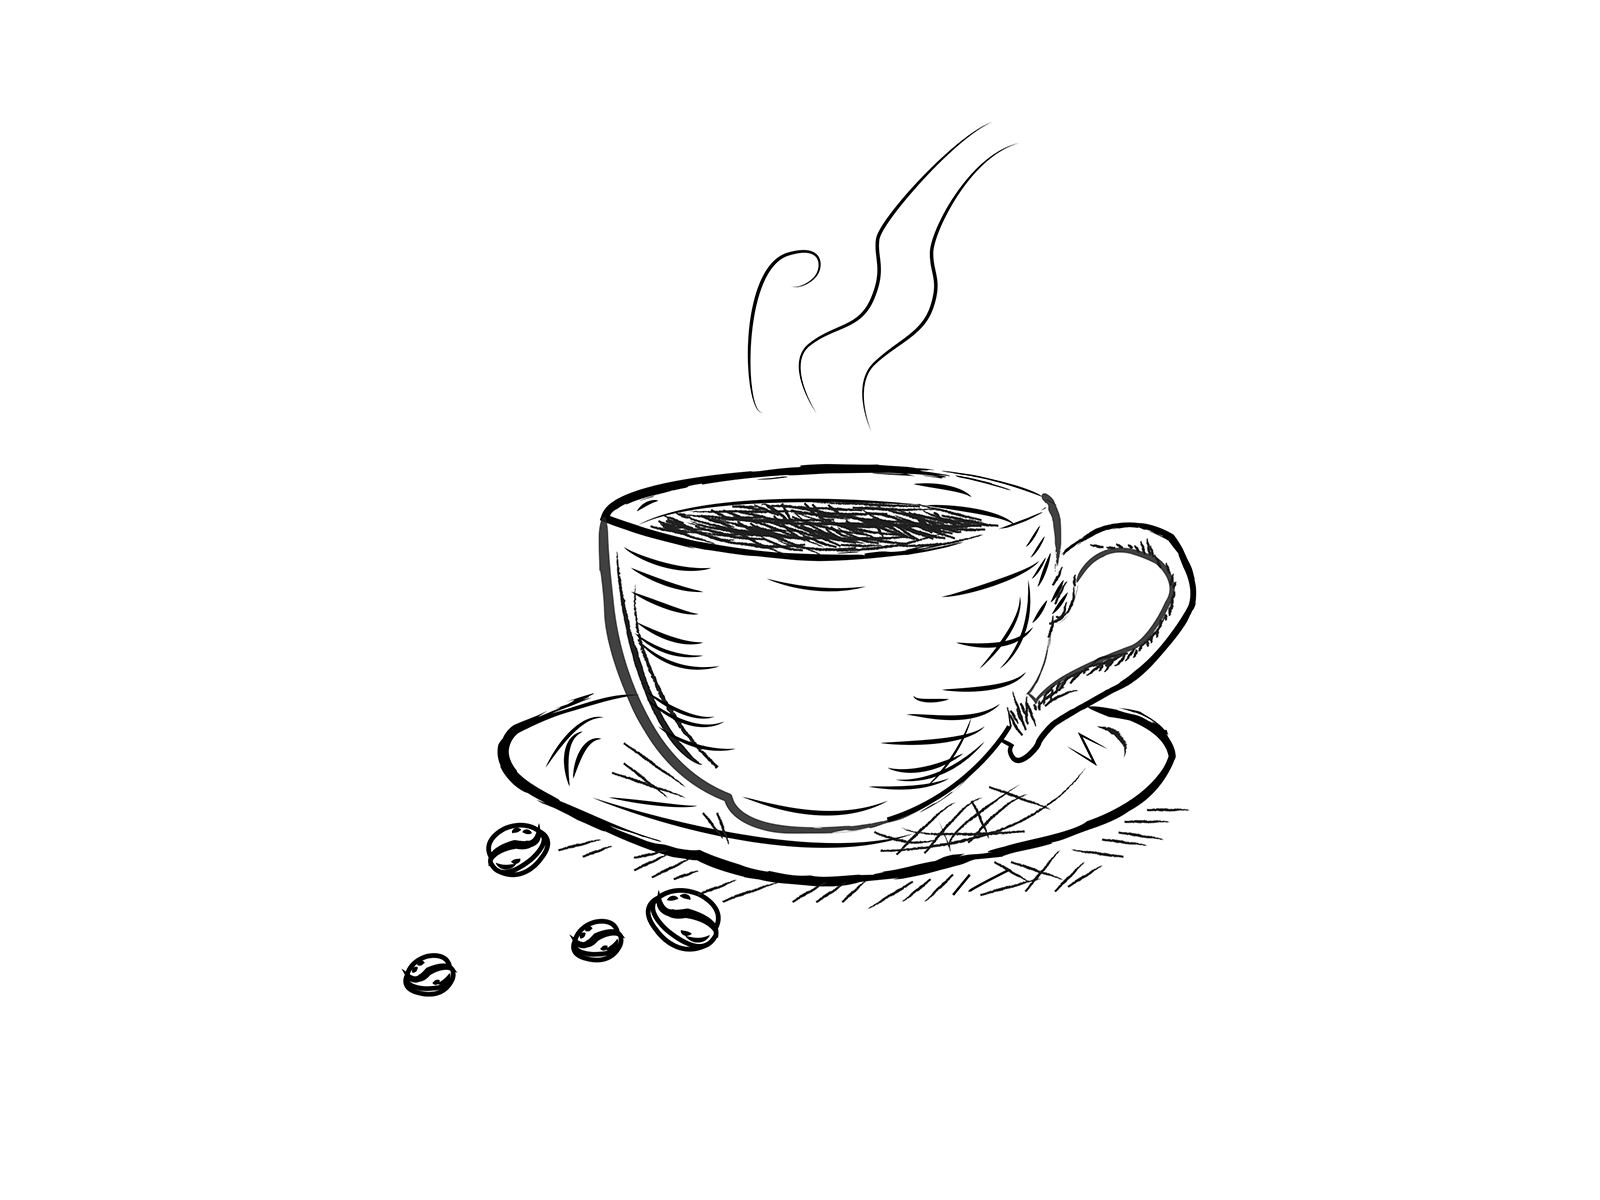 A coffee cup line art style by Milos Lacko on Dribbble